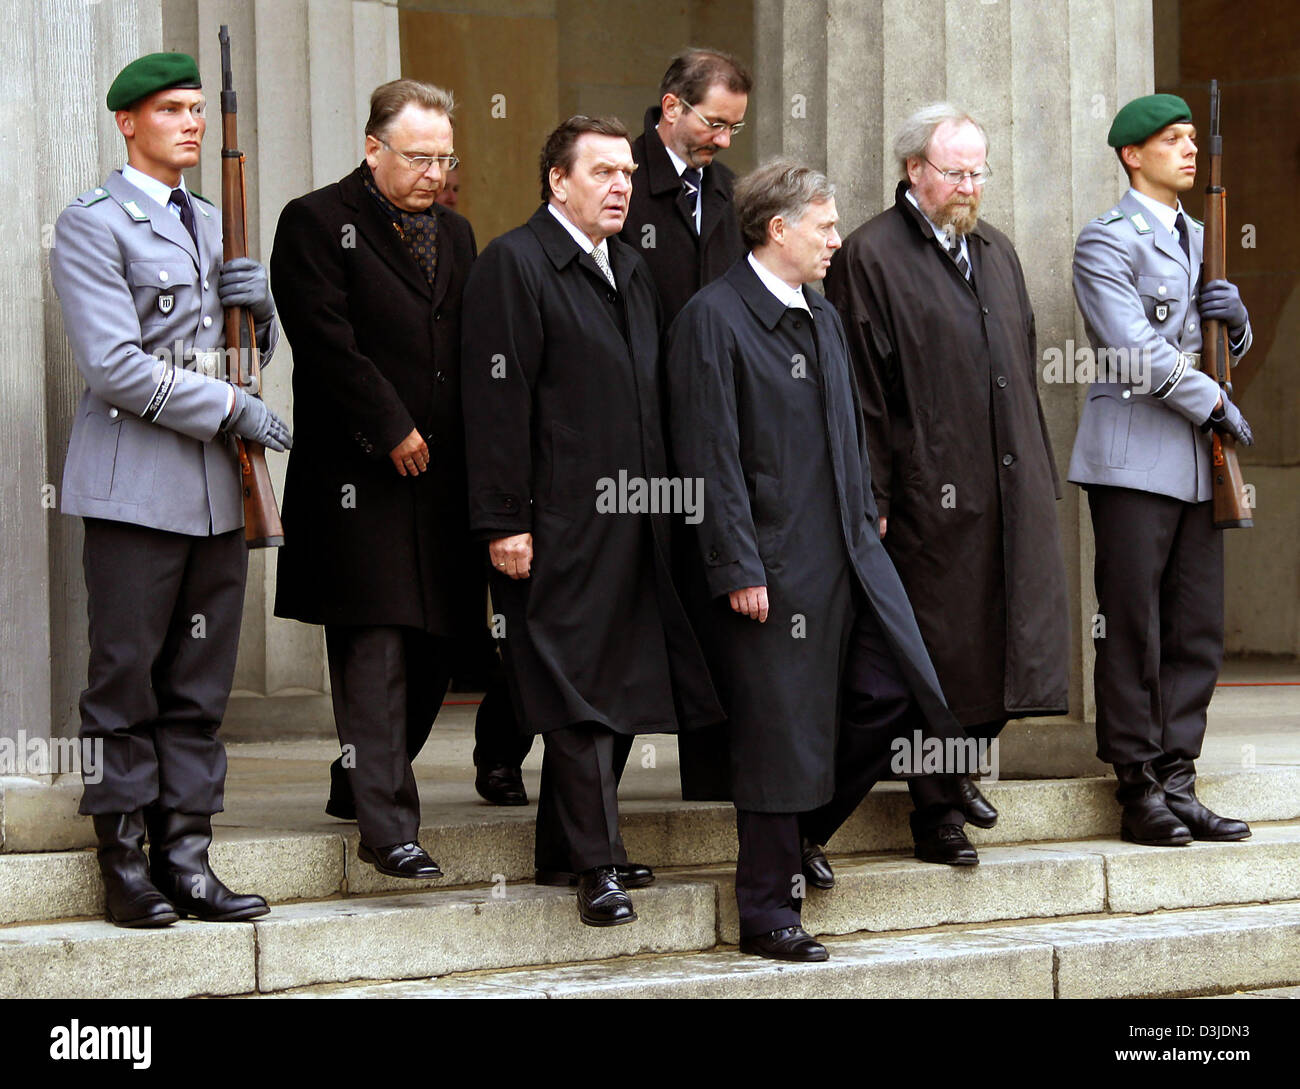 (dpa) - Framed by two guards Federal Constitutional Court President Hans-Juergen Papier, Chancellor Gerhard Schroeder, Federal Council President Matthias Platzeck, Federal President Horst Koehler and Federal Diet President Wolfgang Thierse  (from L to R) leave the Neue Wache in Berlin, Germany, 8 May 2005. The leadership of Germany commemorated the victims of the second World War.  Stock Photo